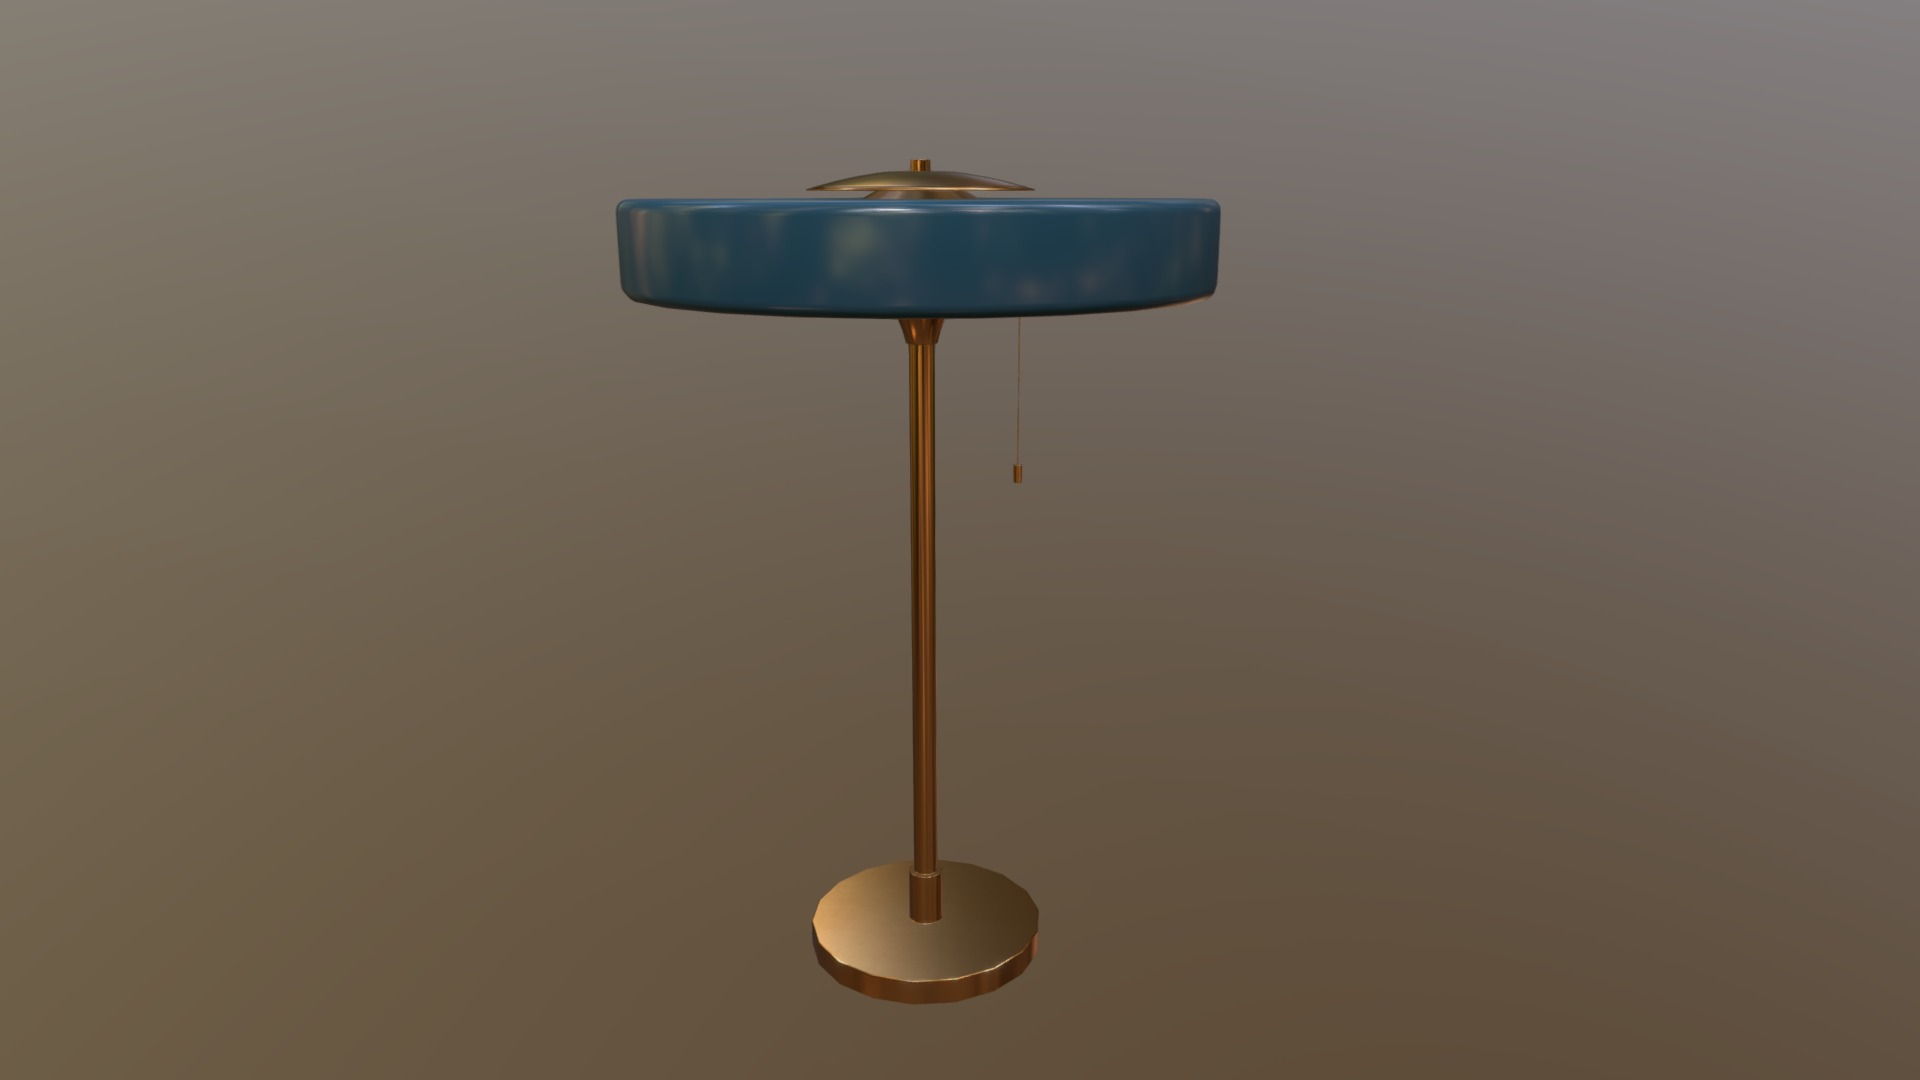 3D model Lamp 02 - This is a 3D model of the Lamp 02. The 3D model is about a blue lamp shade.